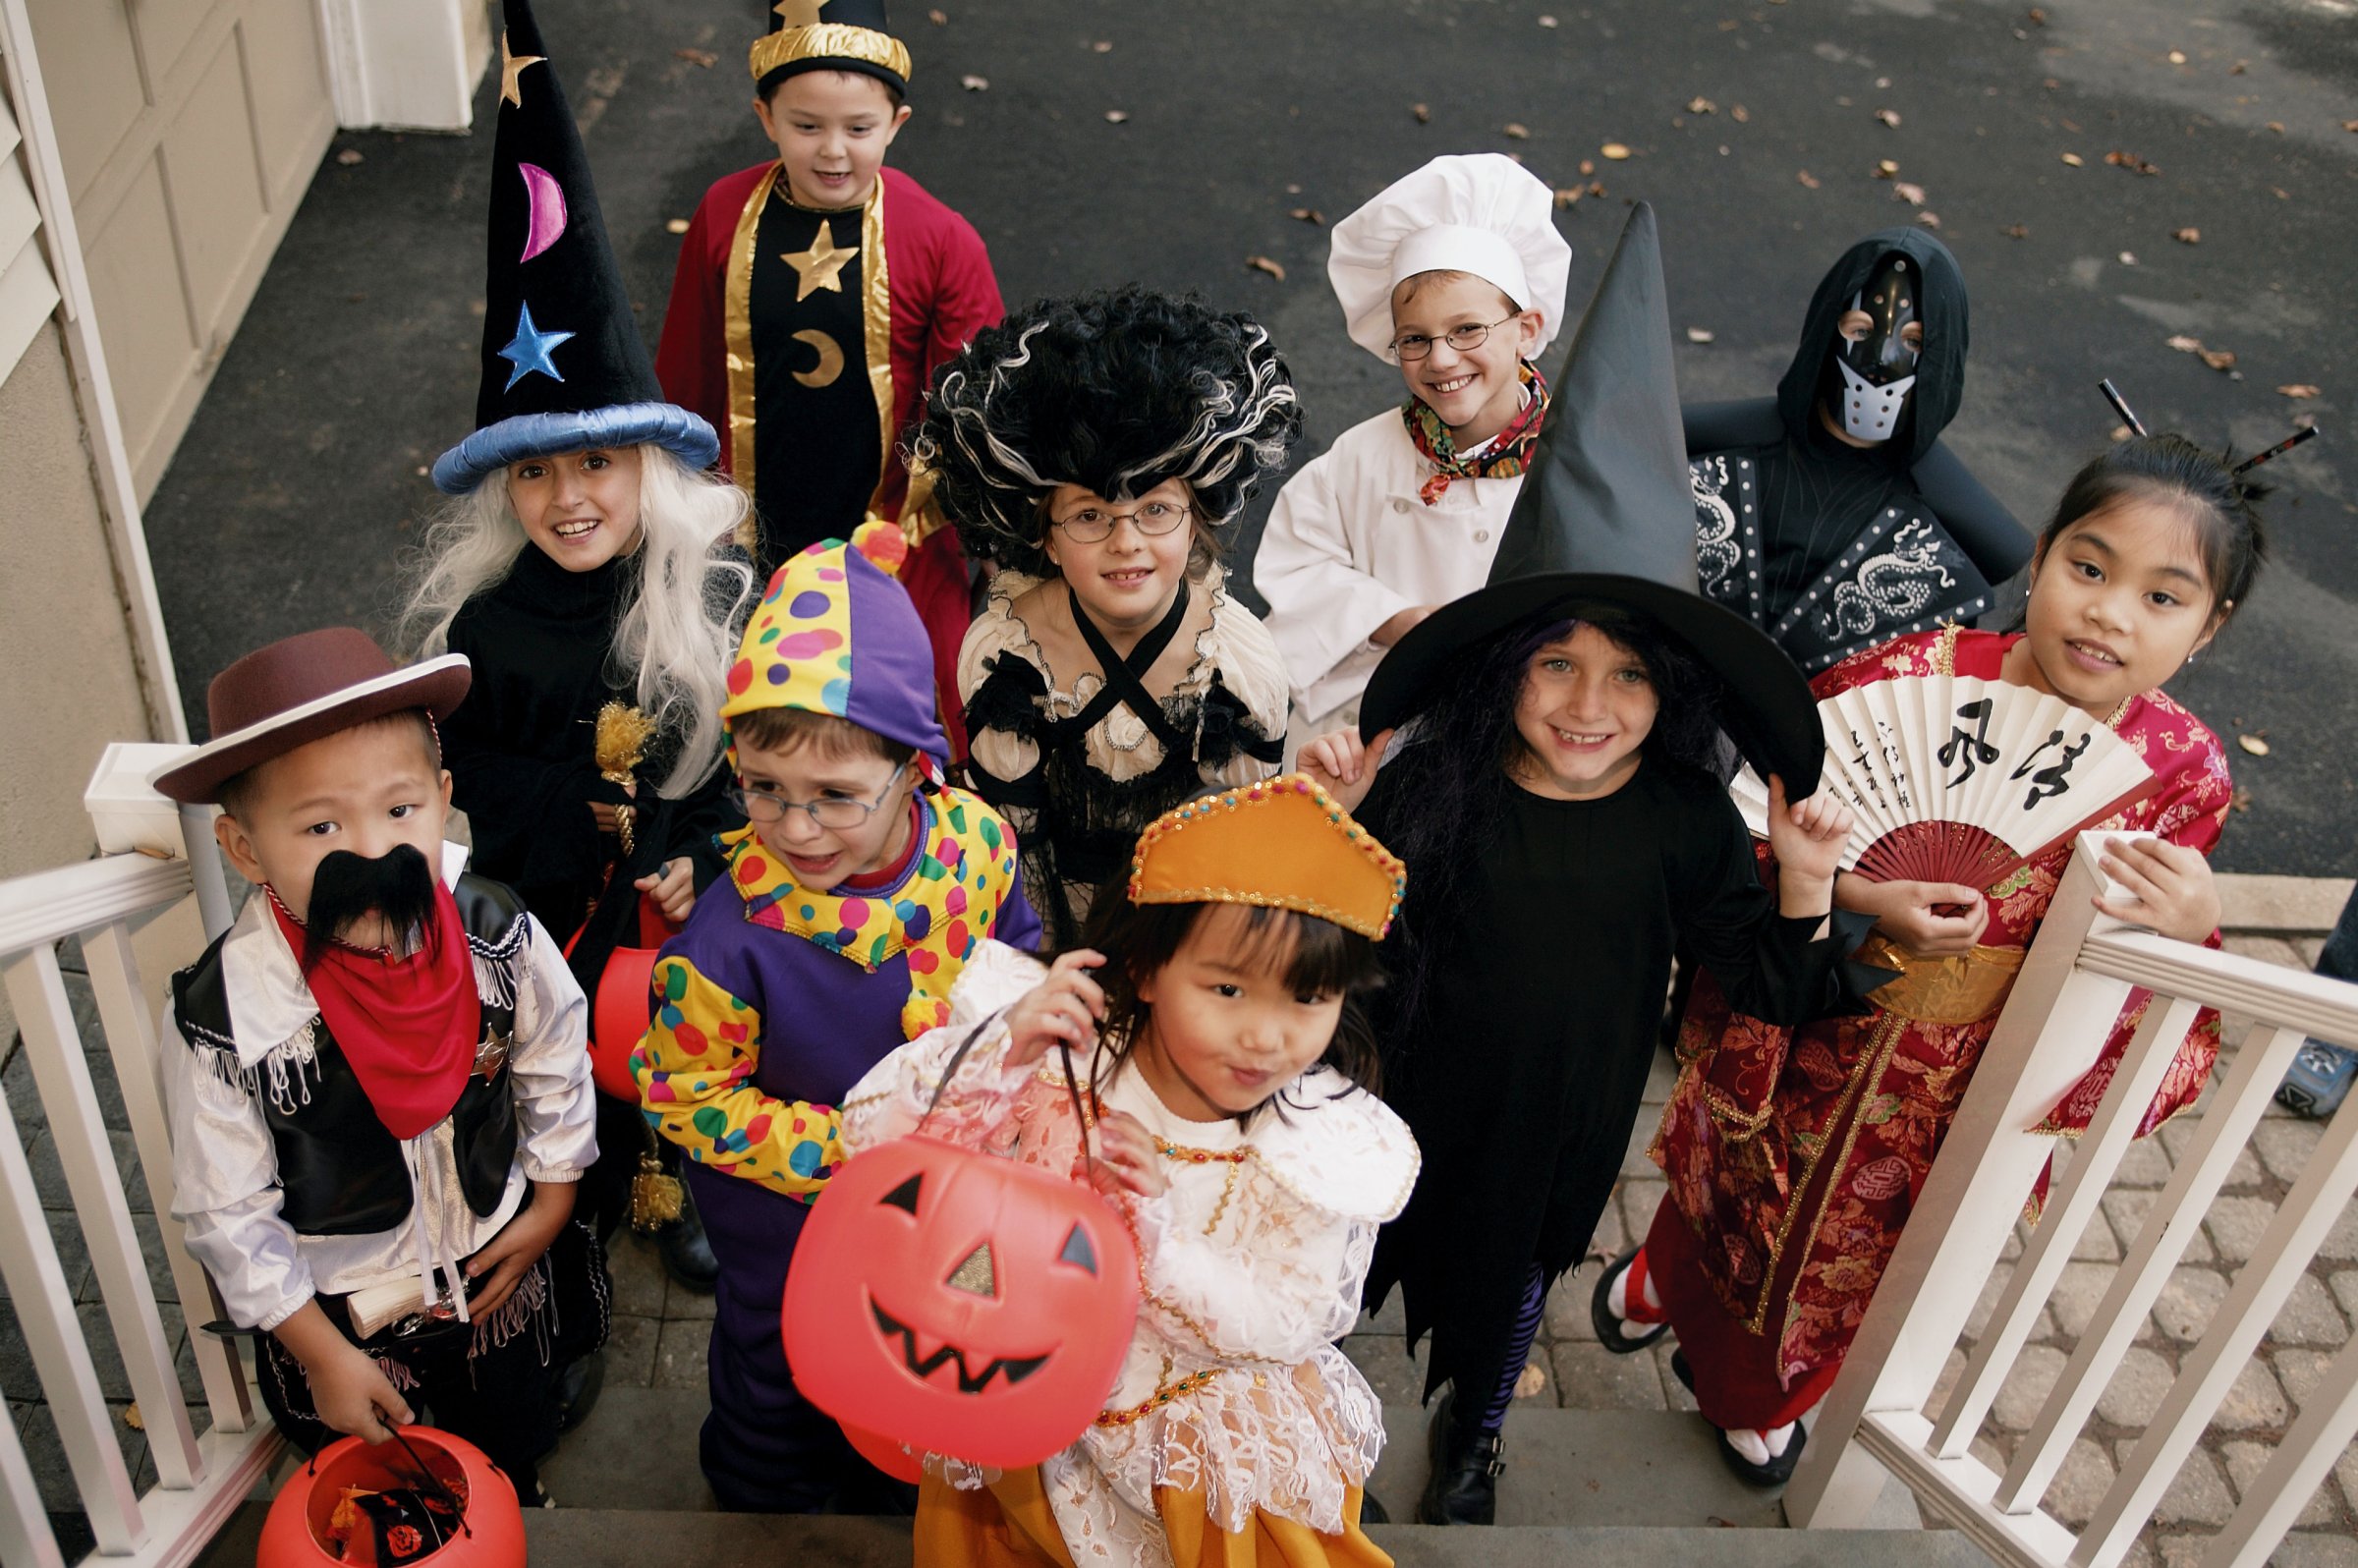 Children trick-or-treating